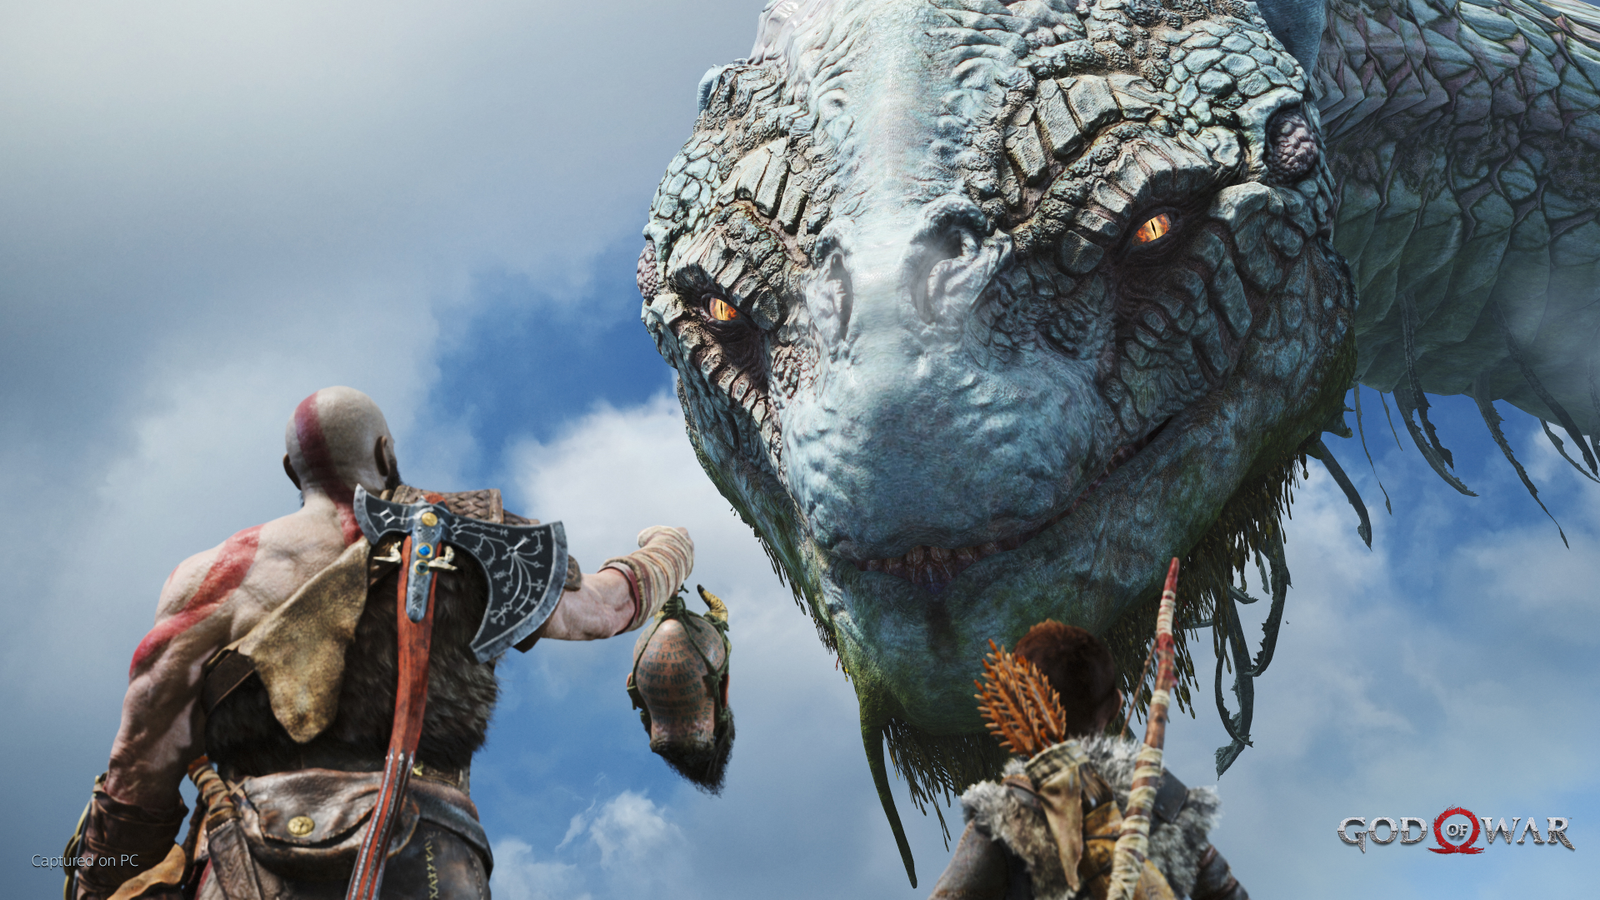 God of War system requirements: Here are the PC specs you need